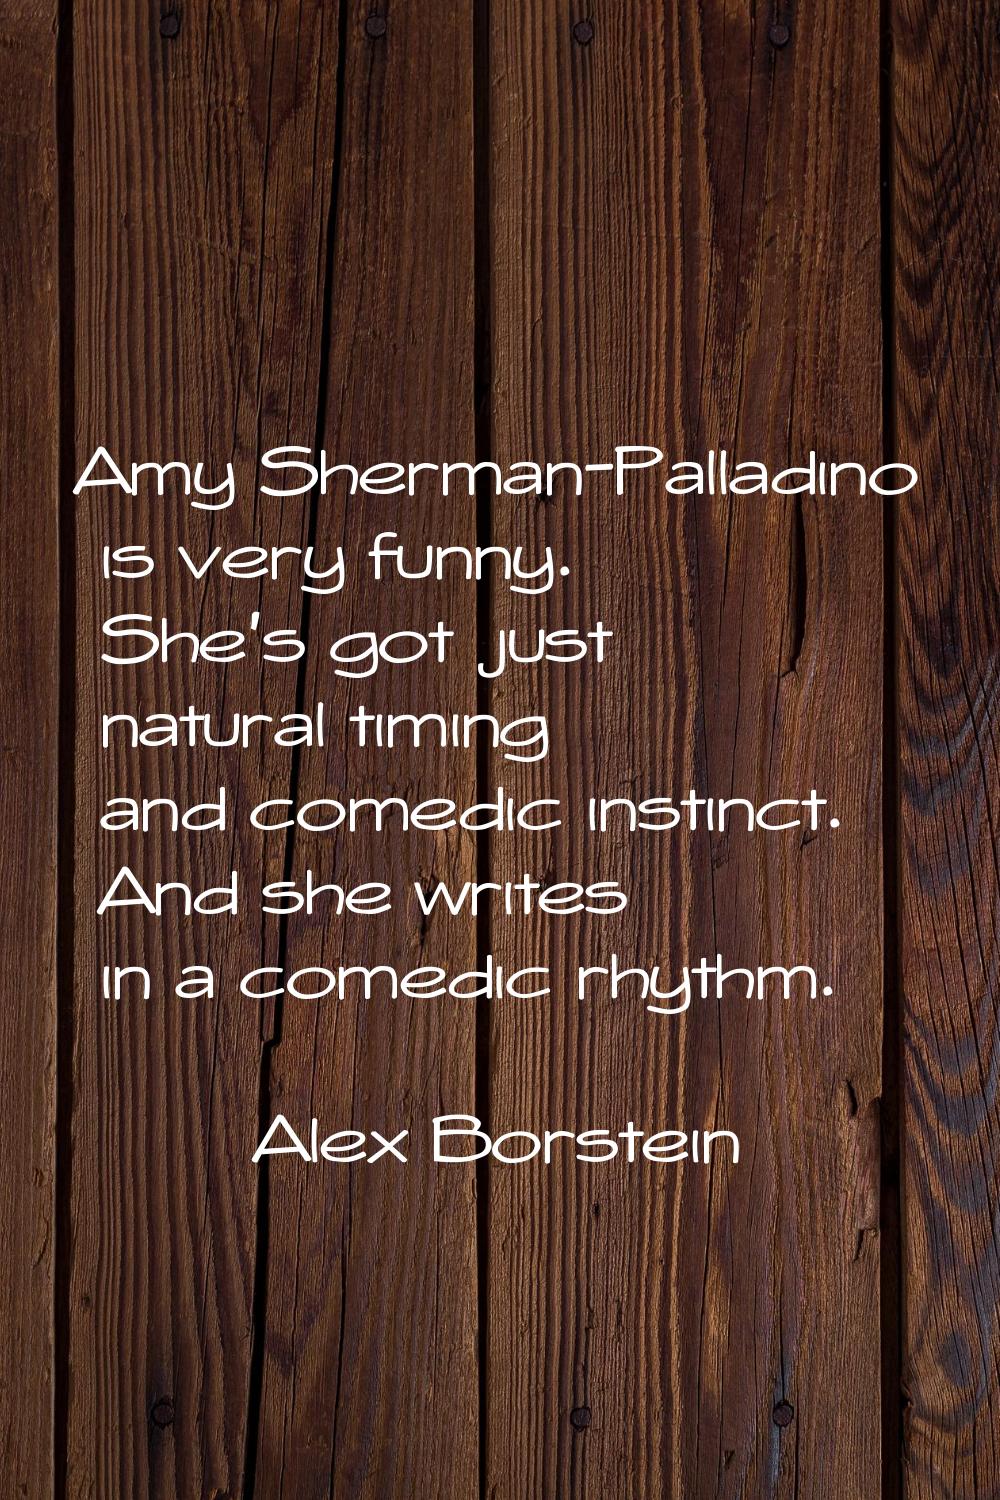 Amy Sherman-Palladino is very funny. She's got just natural timing and comedic instinct. And she wr